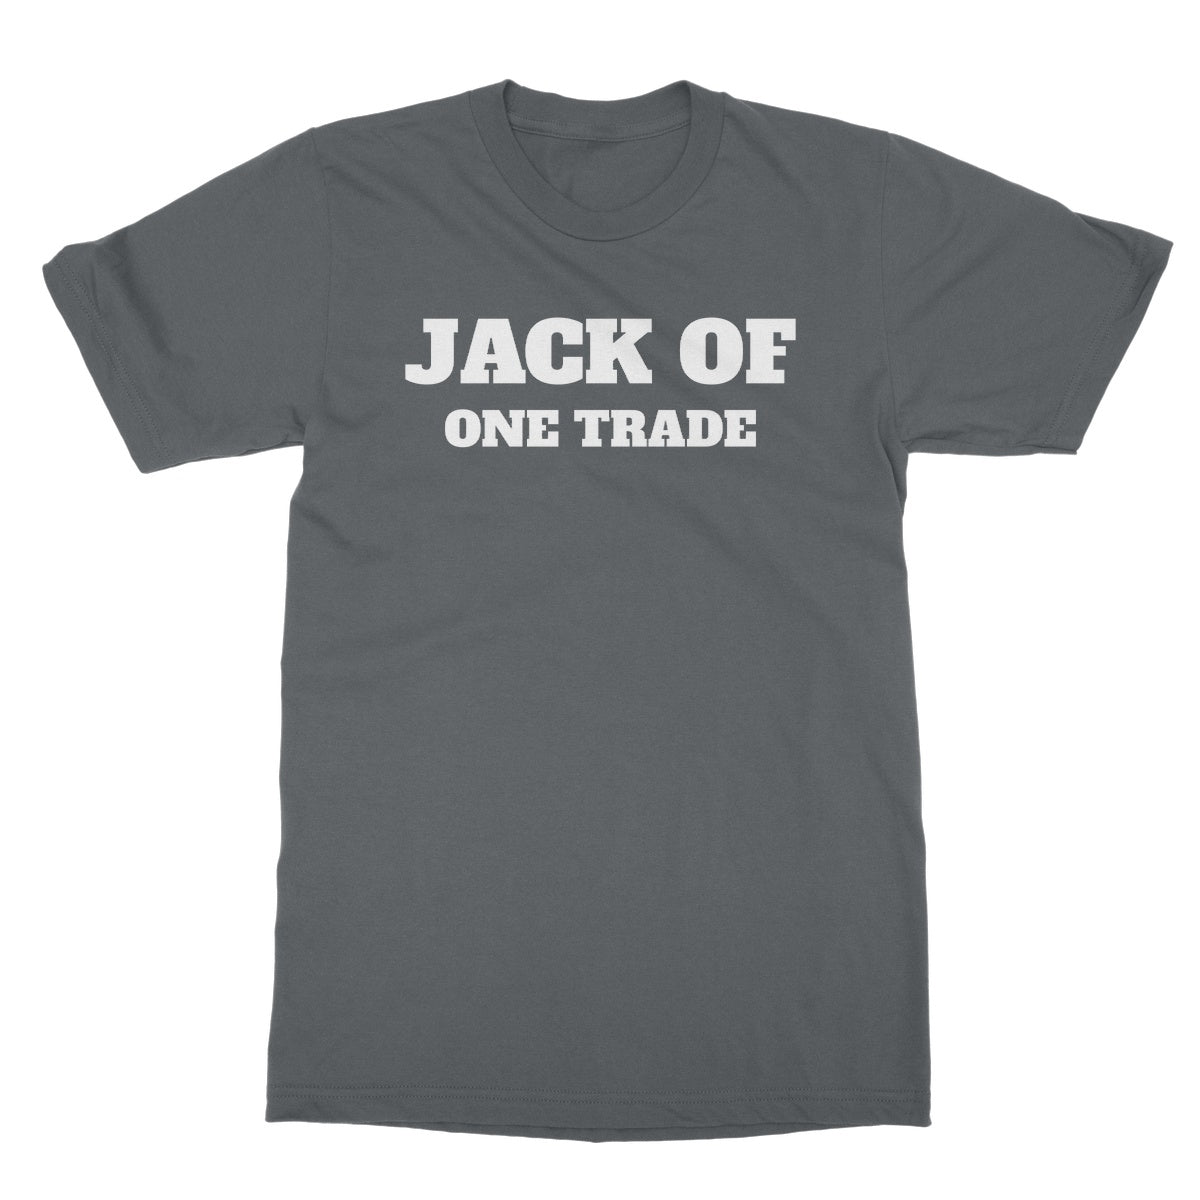 jack of one trade t shirt grey